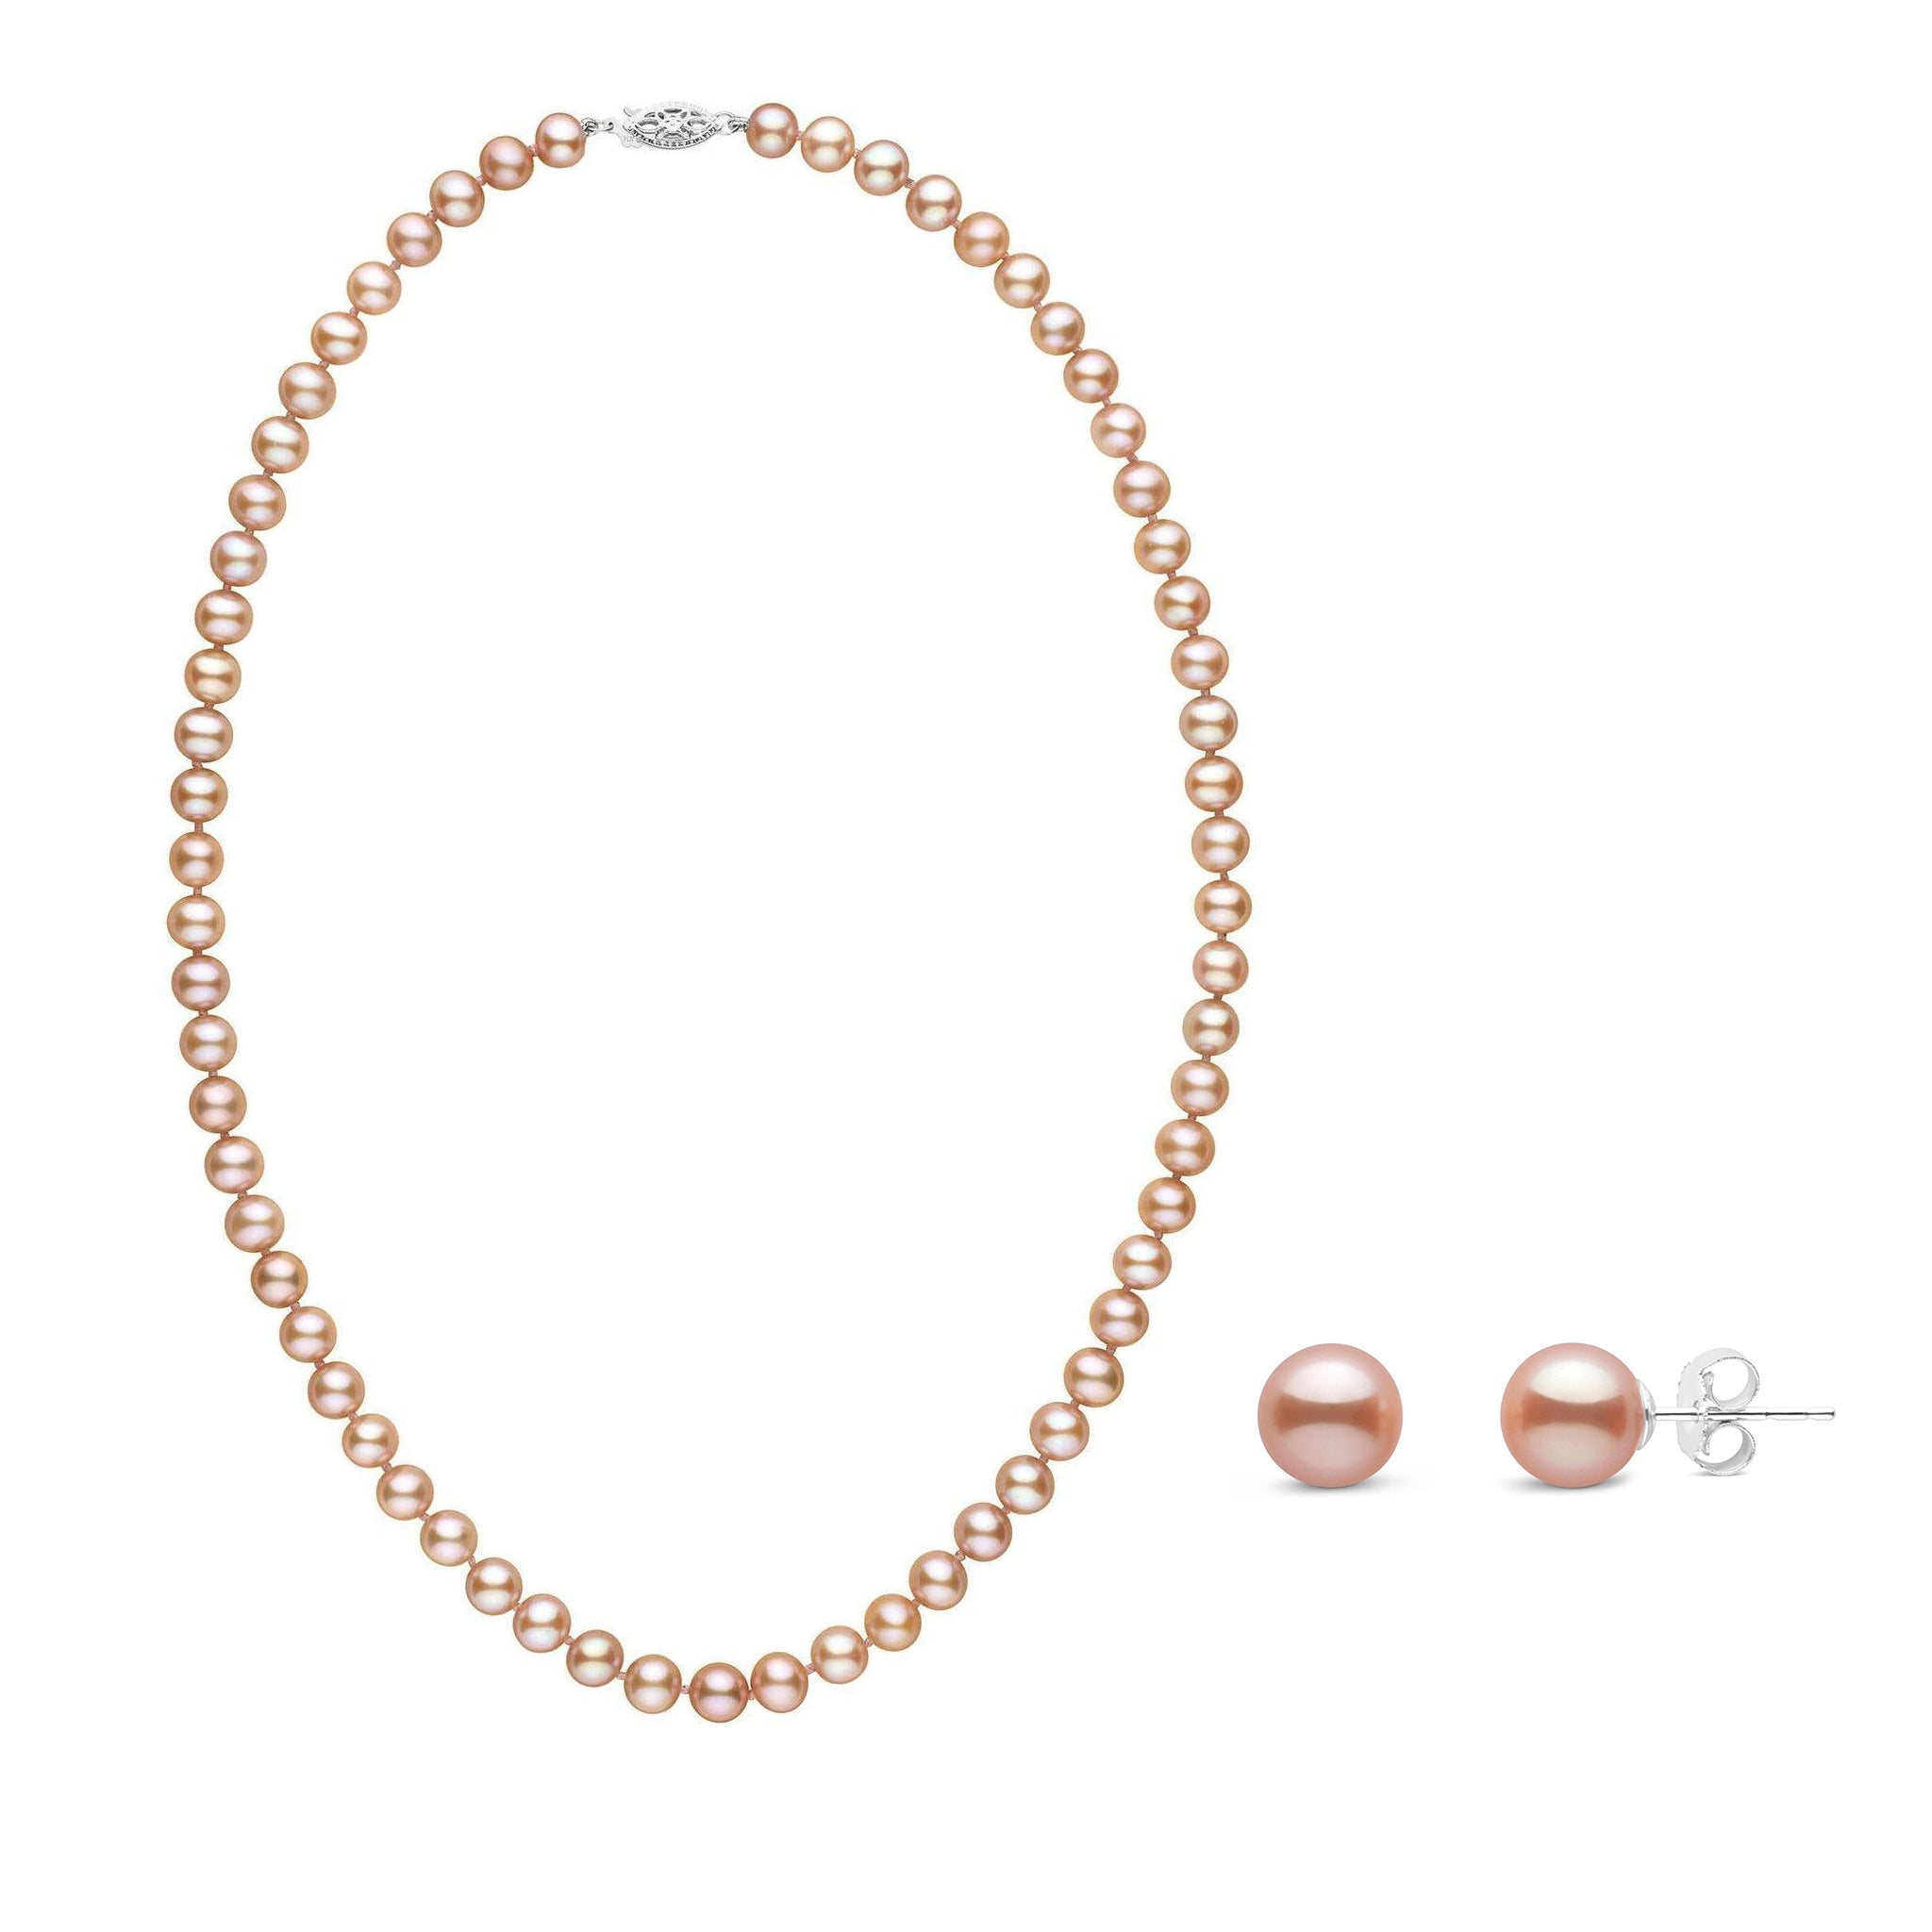 6.5-7.0 mm Pink to Peach AAA Freshwater Pearl 18 Inch Necklace and Stud Earring Set